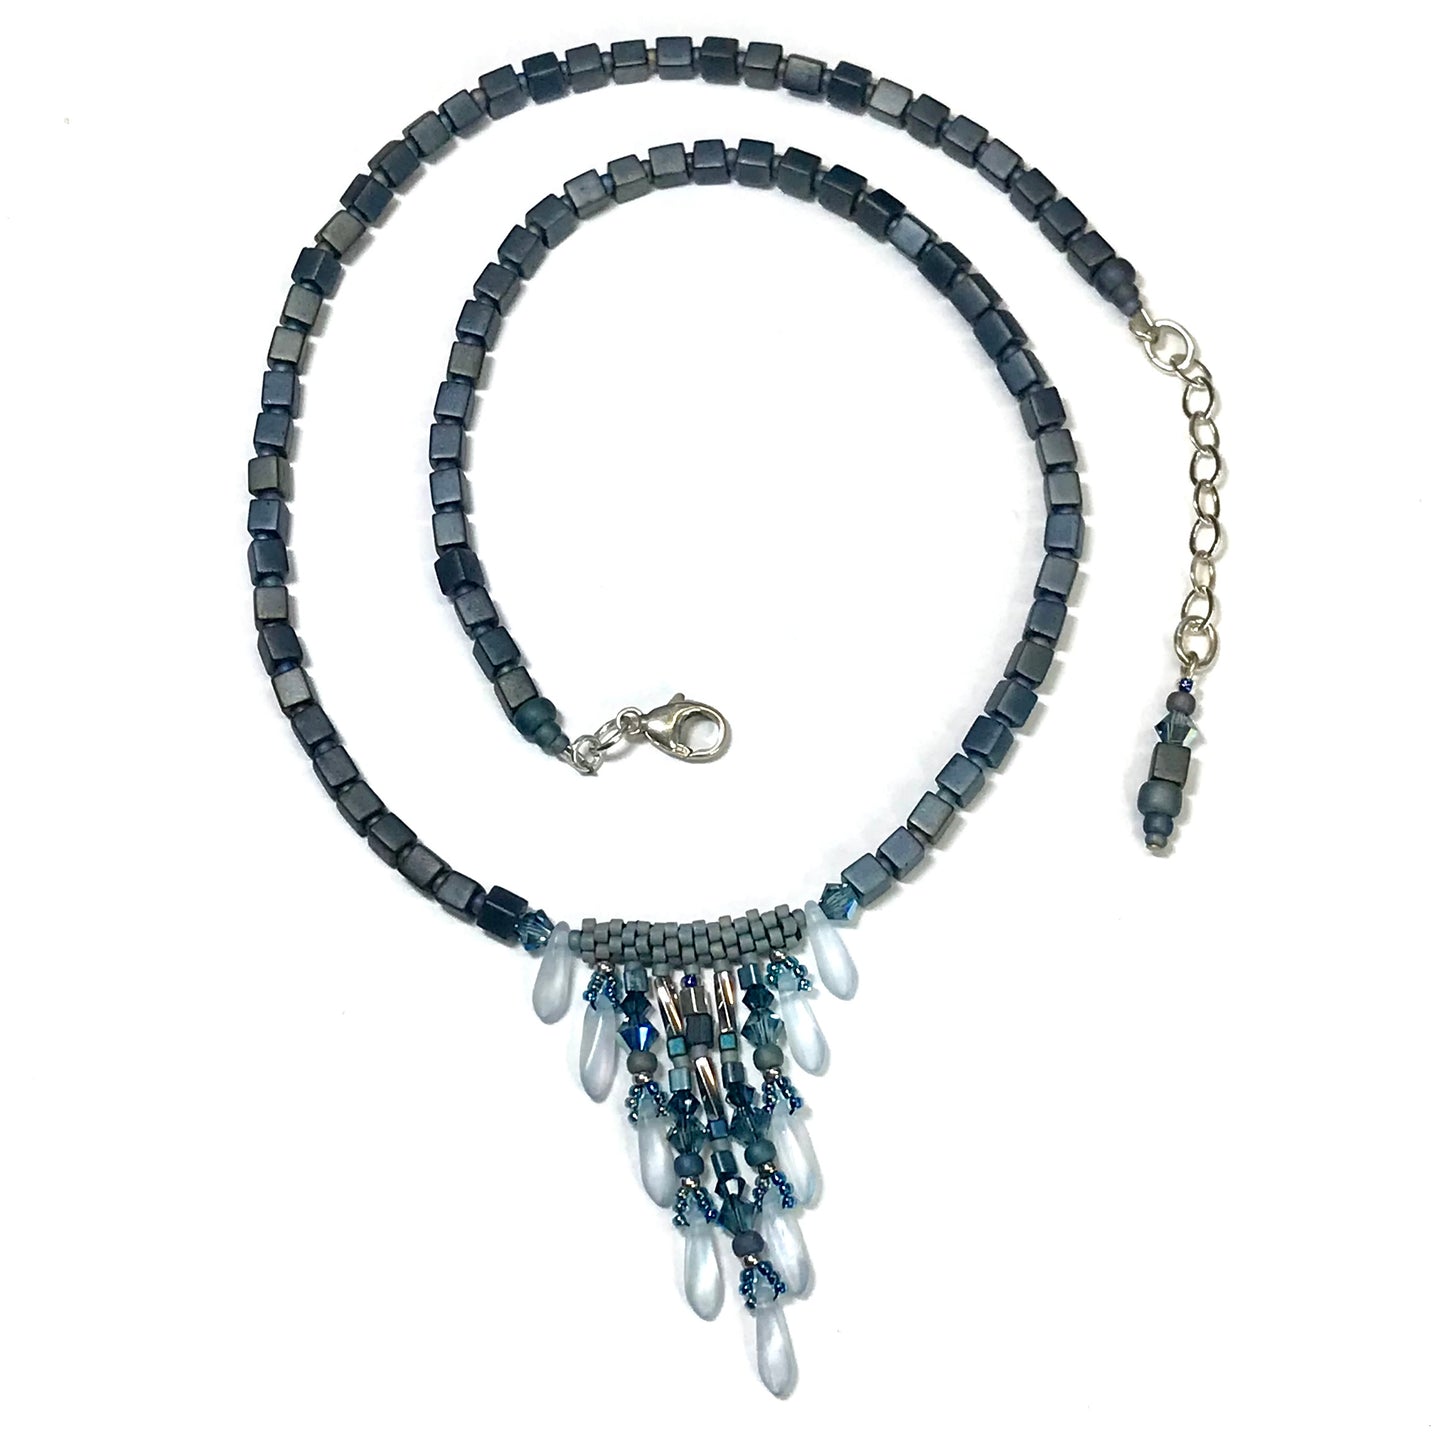 Blue Gray Silver Fringy Necklace - 7 strands